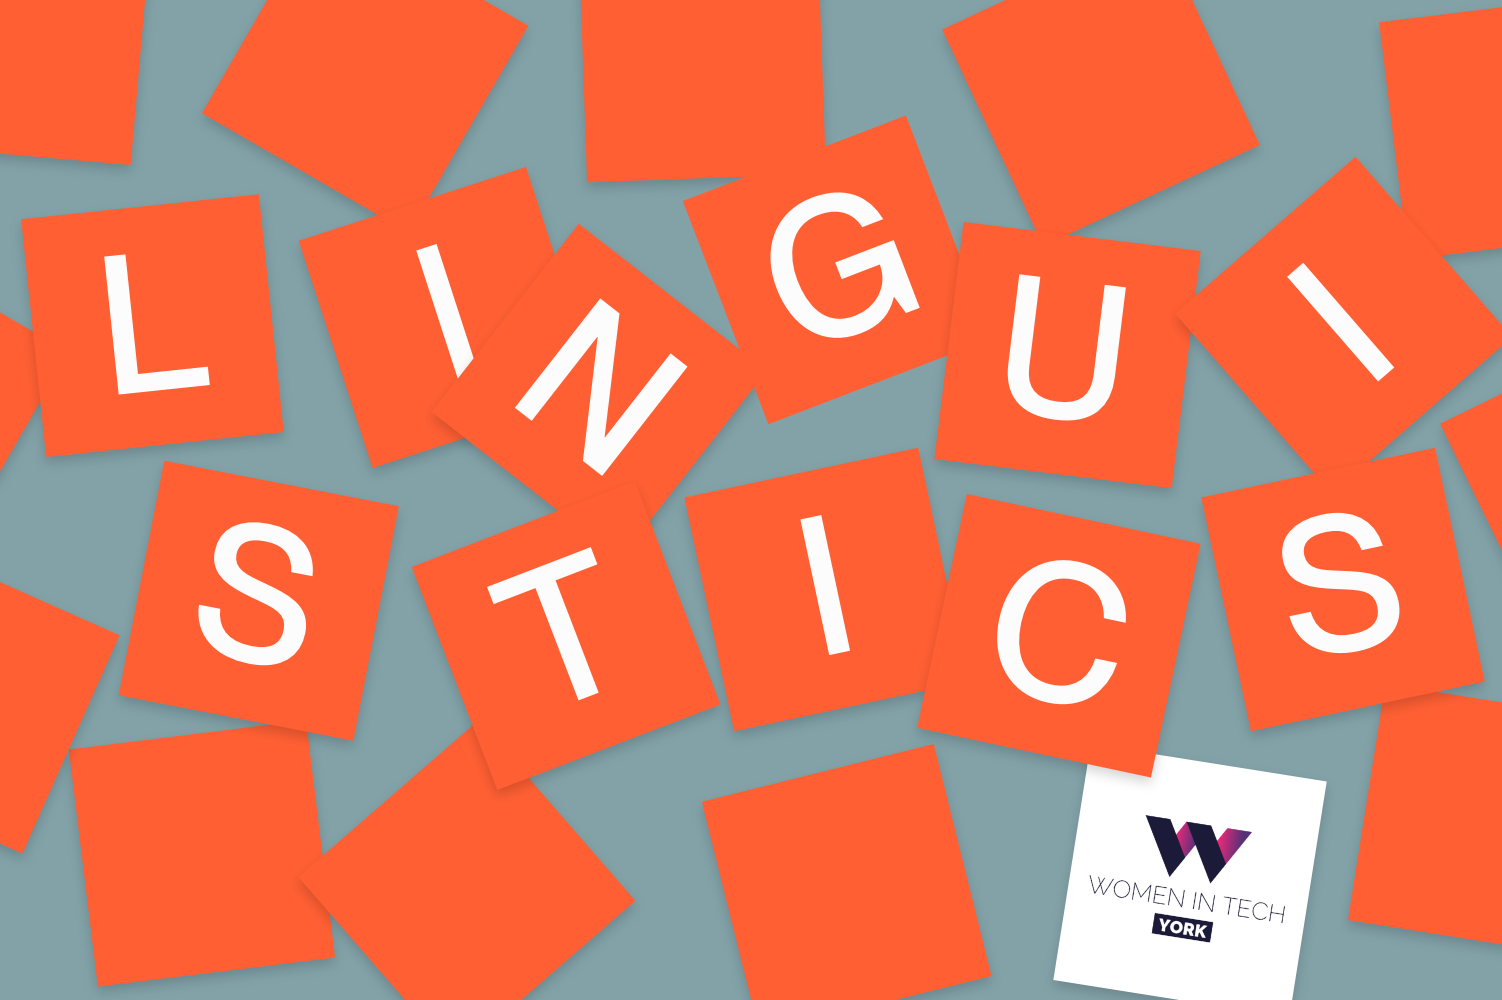 Links to a post on 'CYB at Women in Tech: using linguistics in digital'